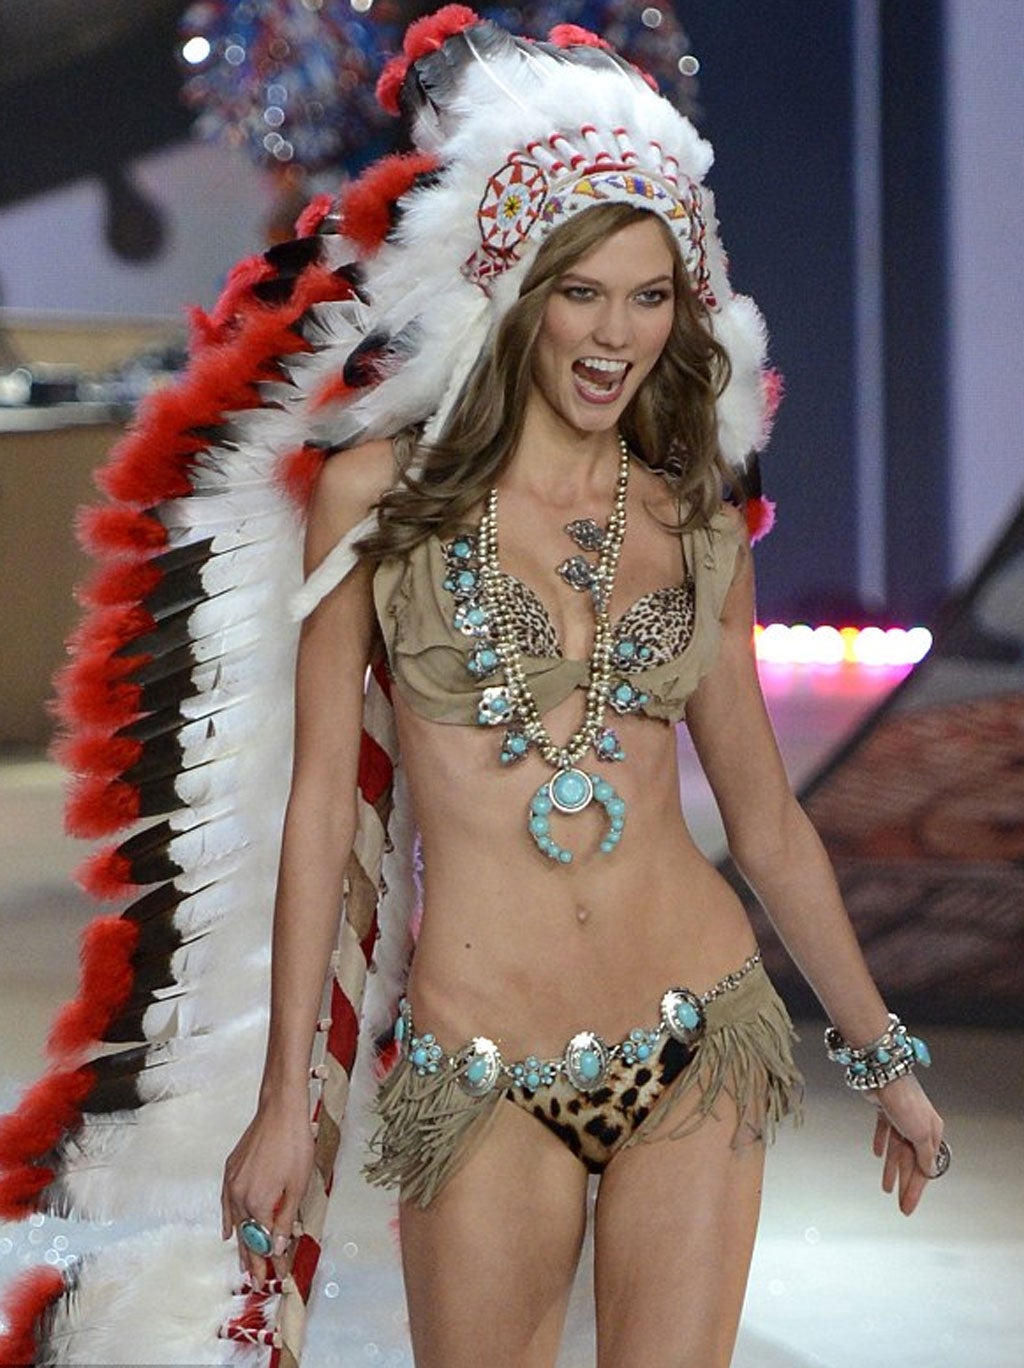 Victoria's Secret apologises for offence caused by using Native